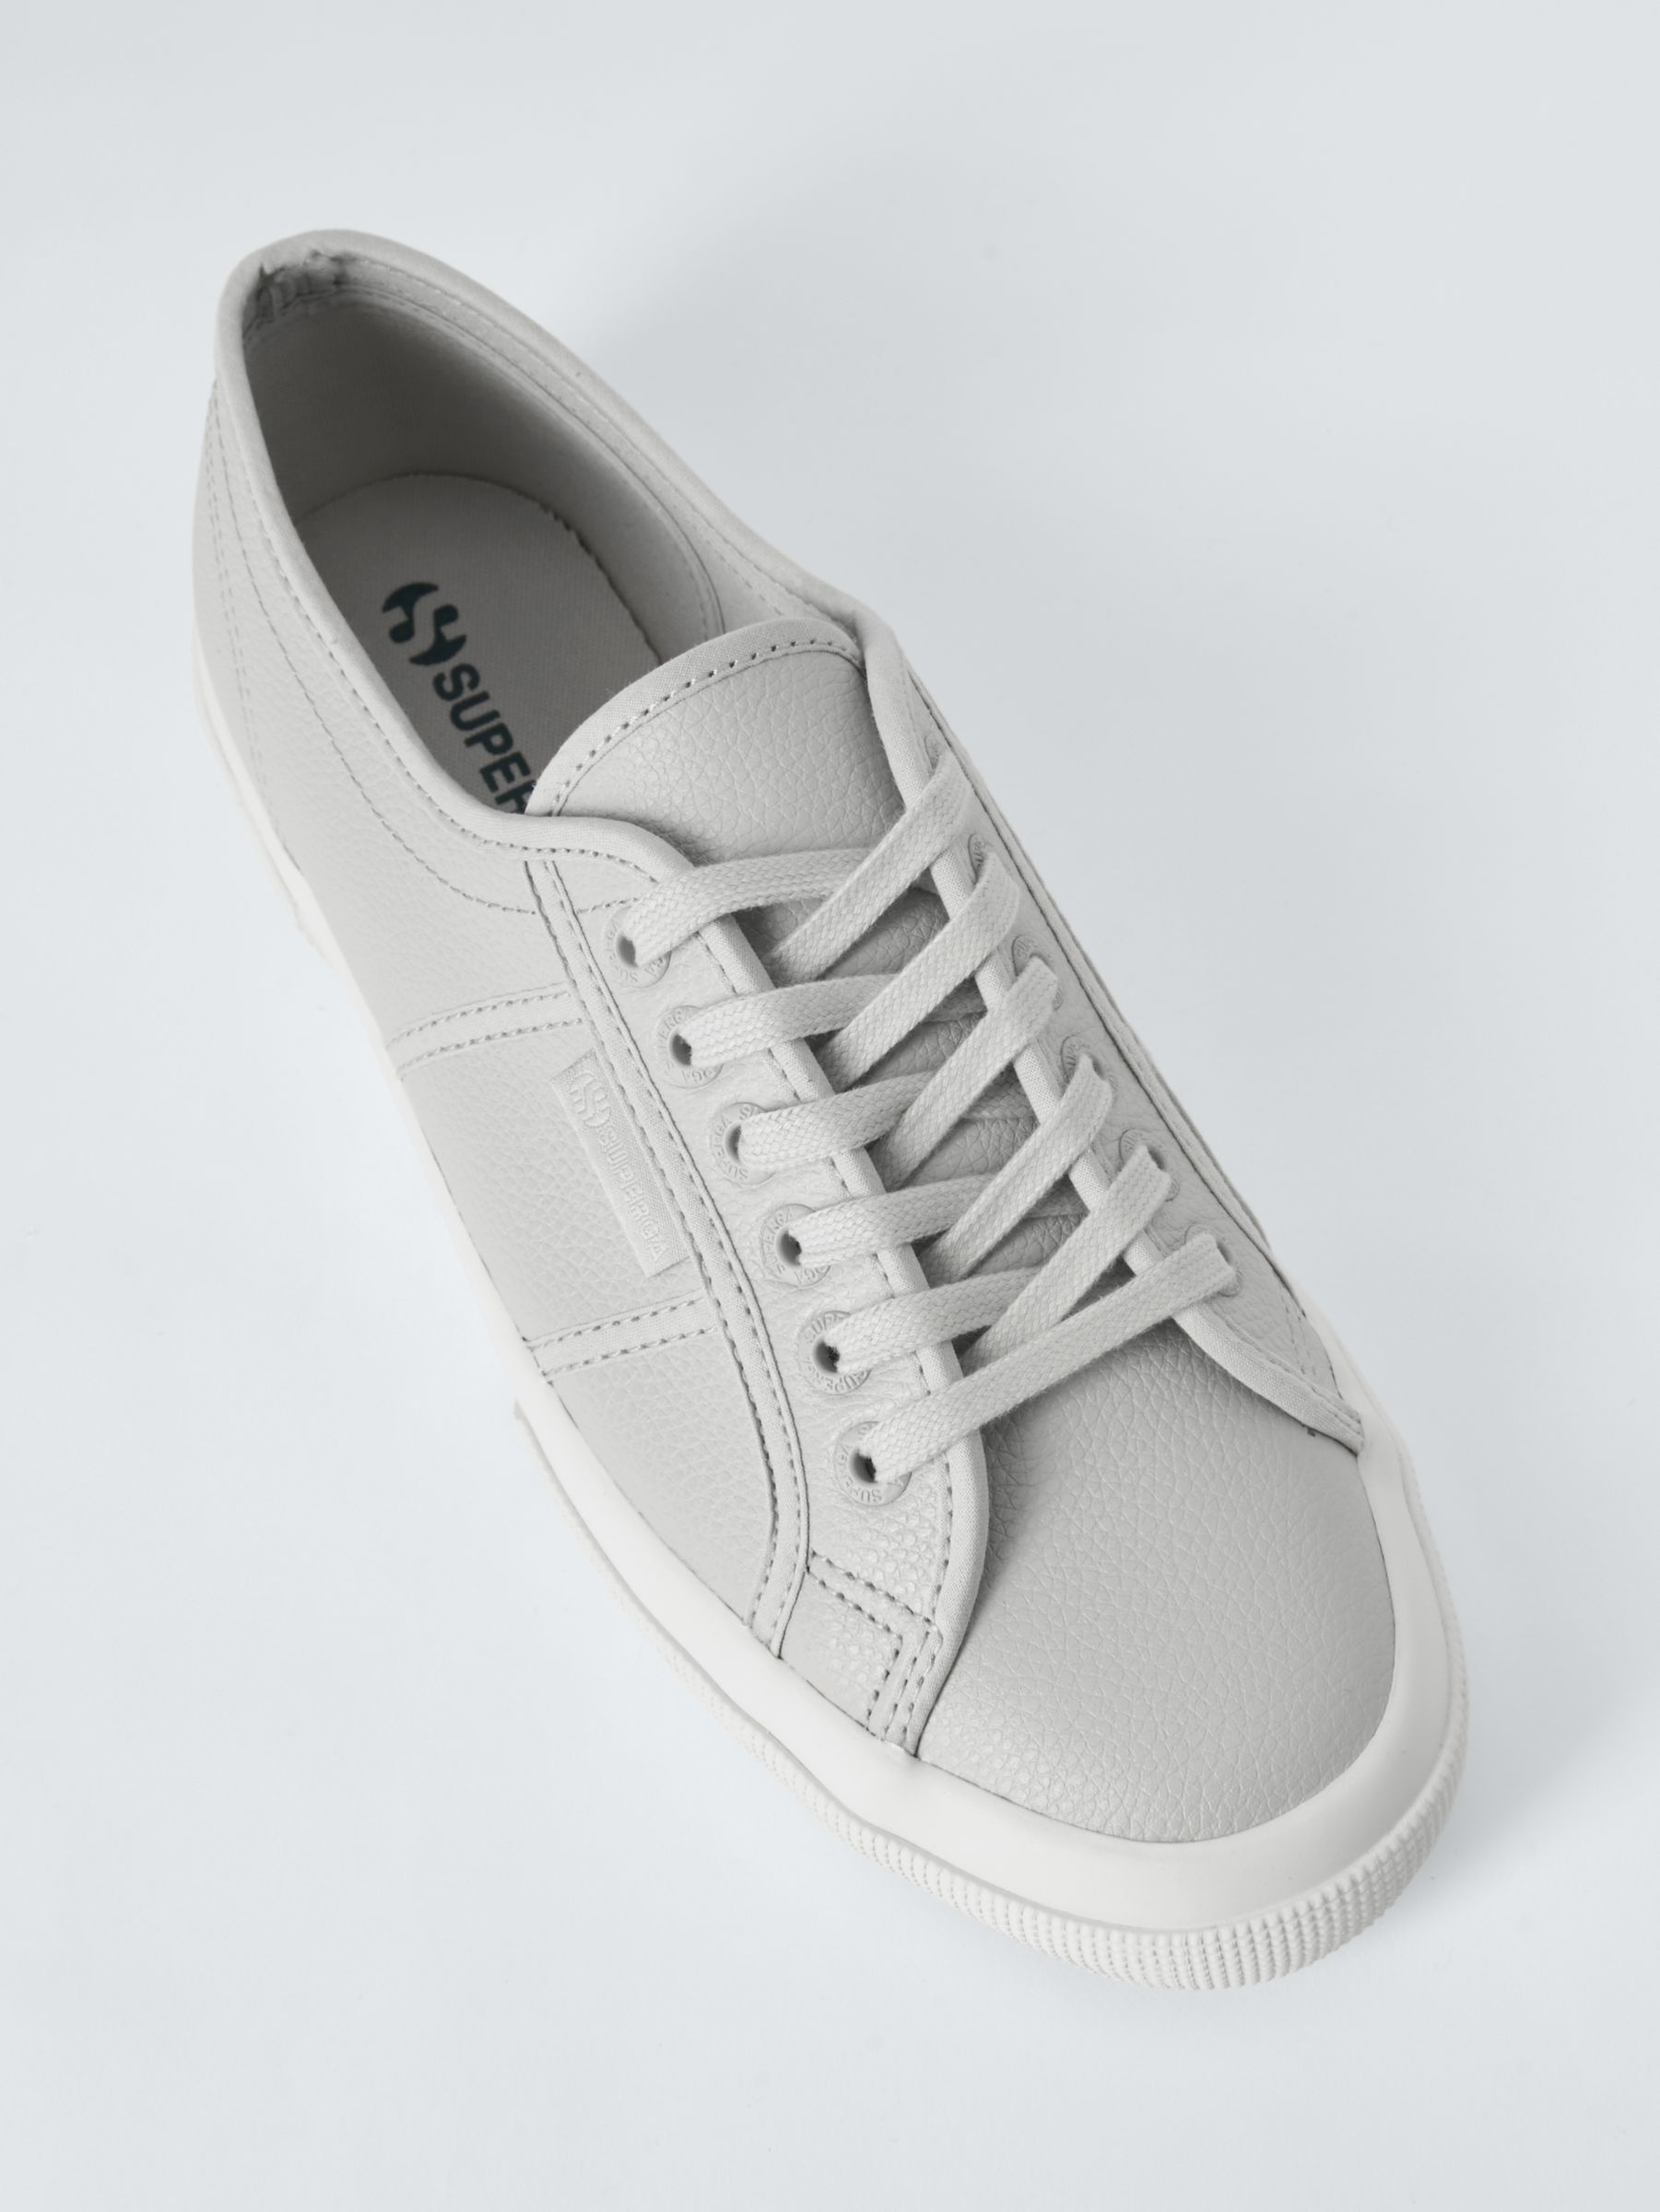 Buy Superga 2750 Leather Trainers, Grey Silver Online at johnlewis.com